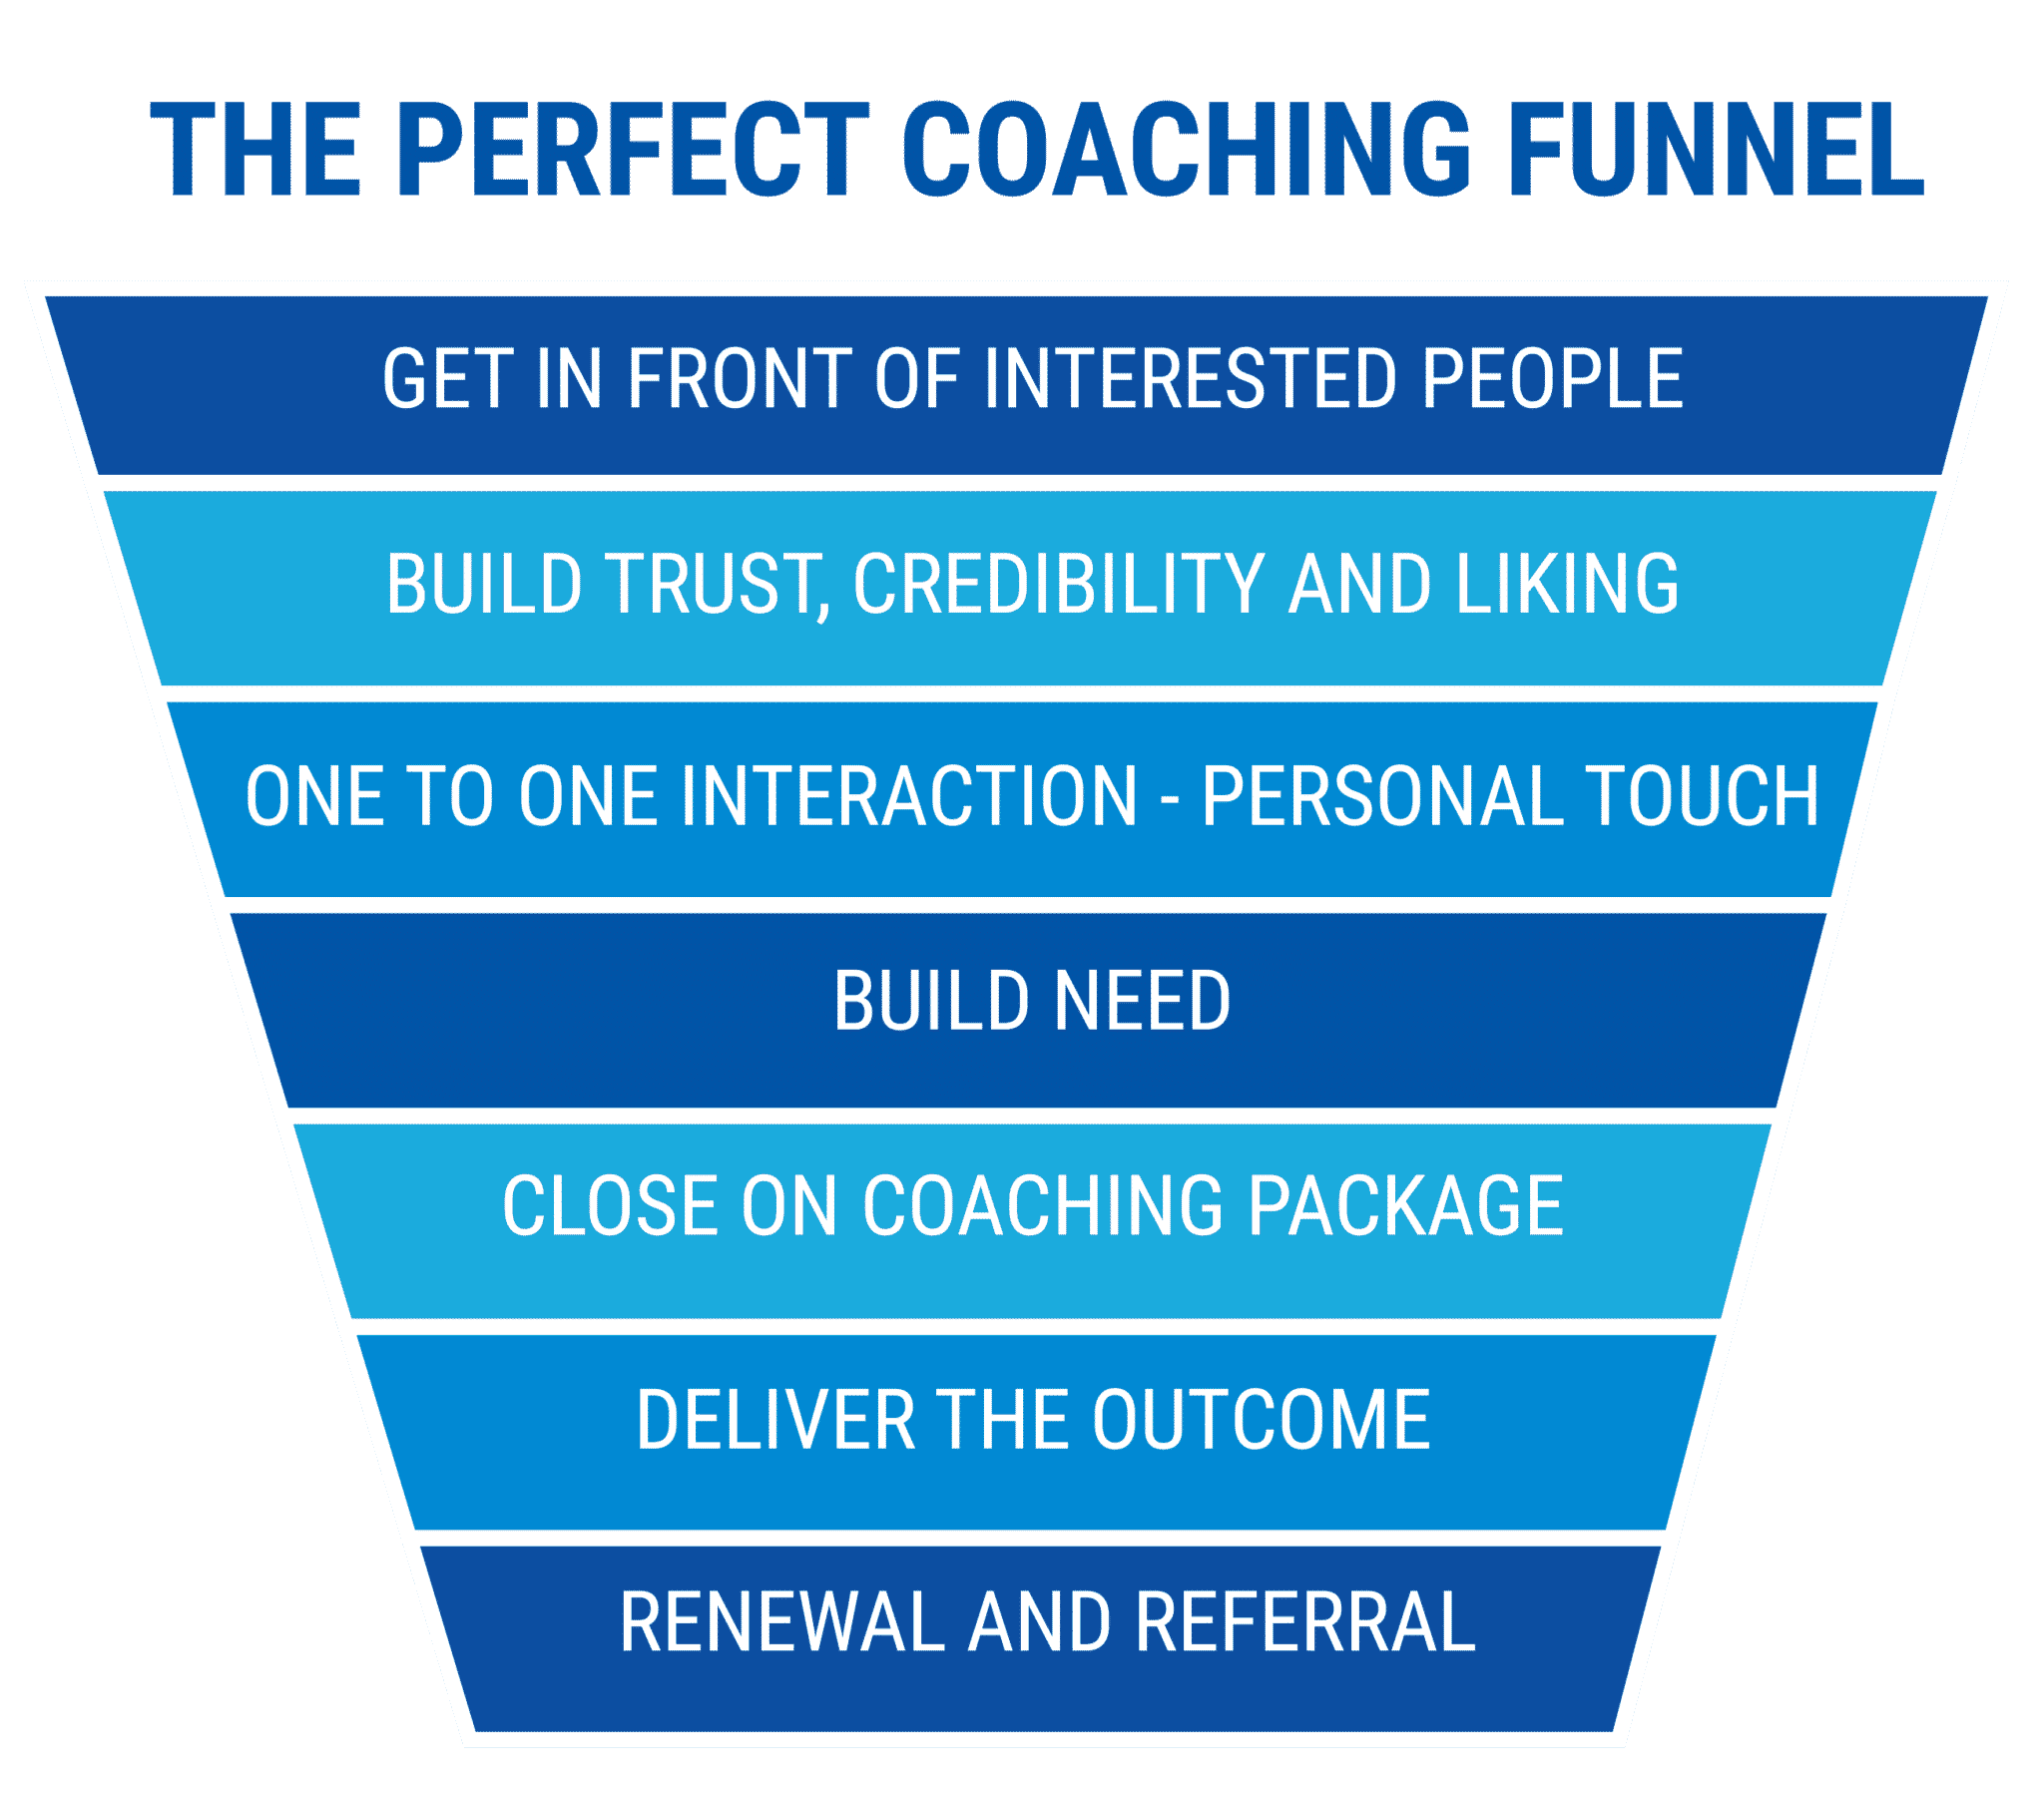 the perfect coaching funnel - starting a coaching business while working full-time